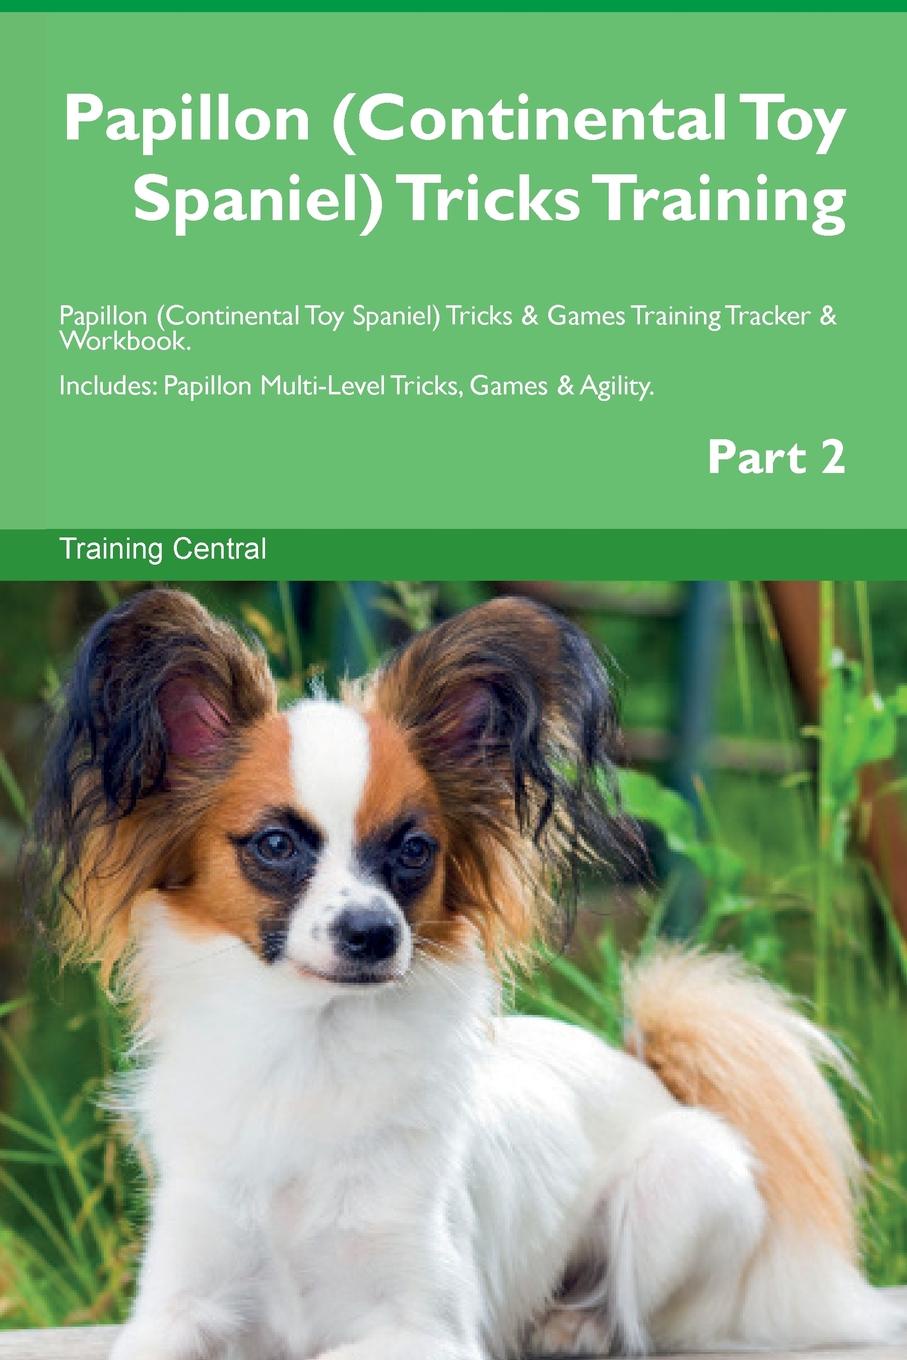 Training Central Papillon (Continental Toy Spaniel) Tricks Training Papillon (Continental Toy Spaniel) Tricks . Games Training Tracker . Workbook. Includes. Papillon Multi-Level Tricks, Games . Agility. Part 2